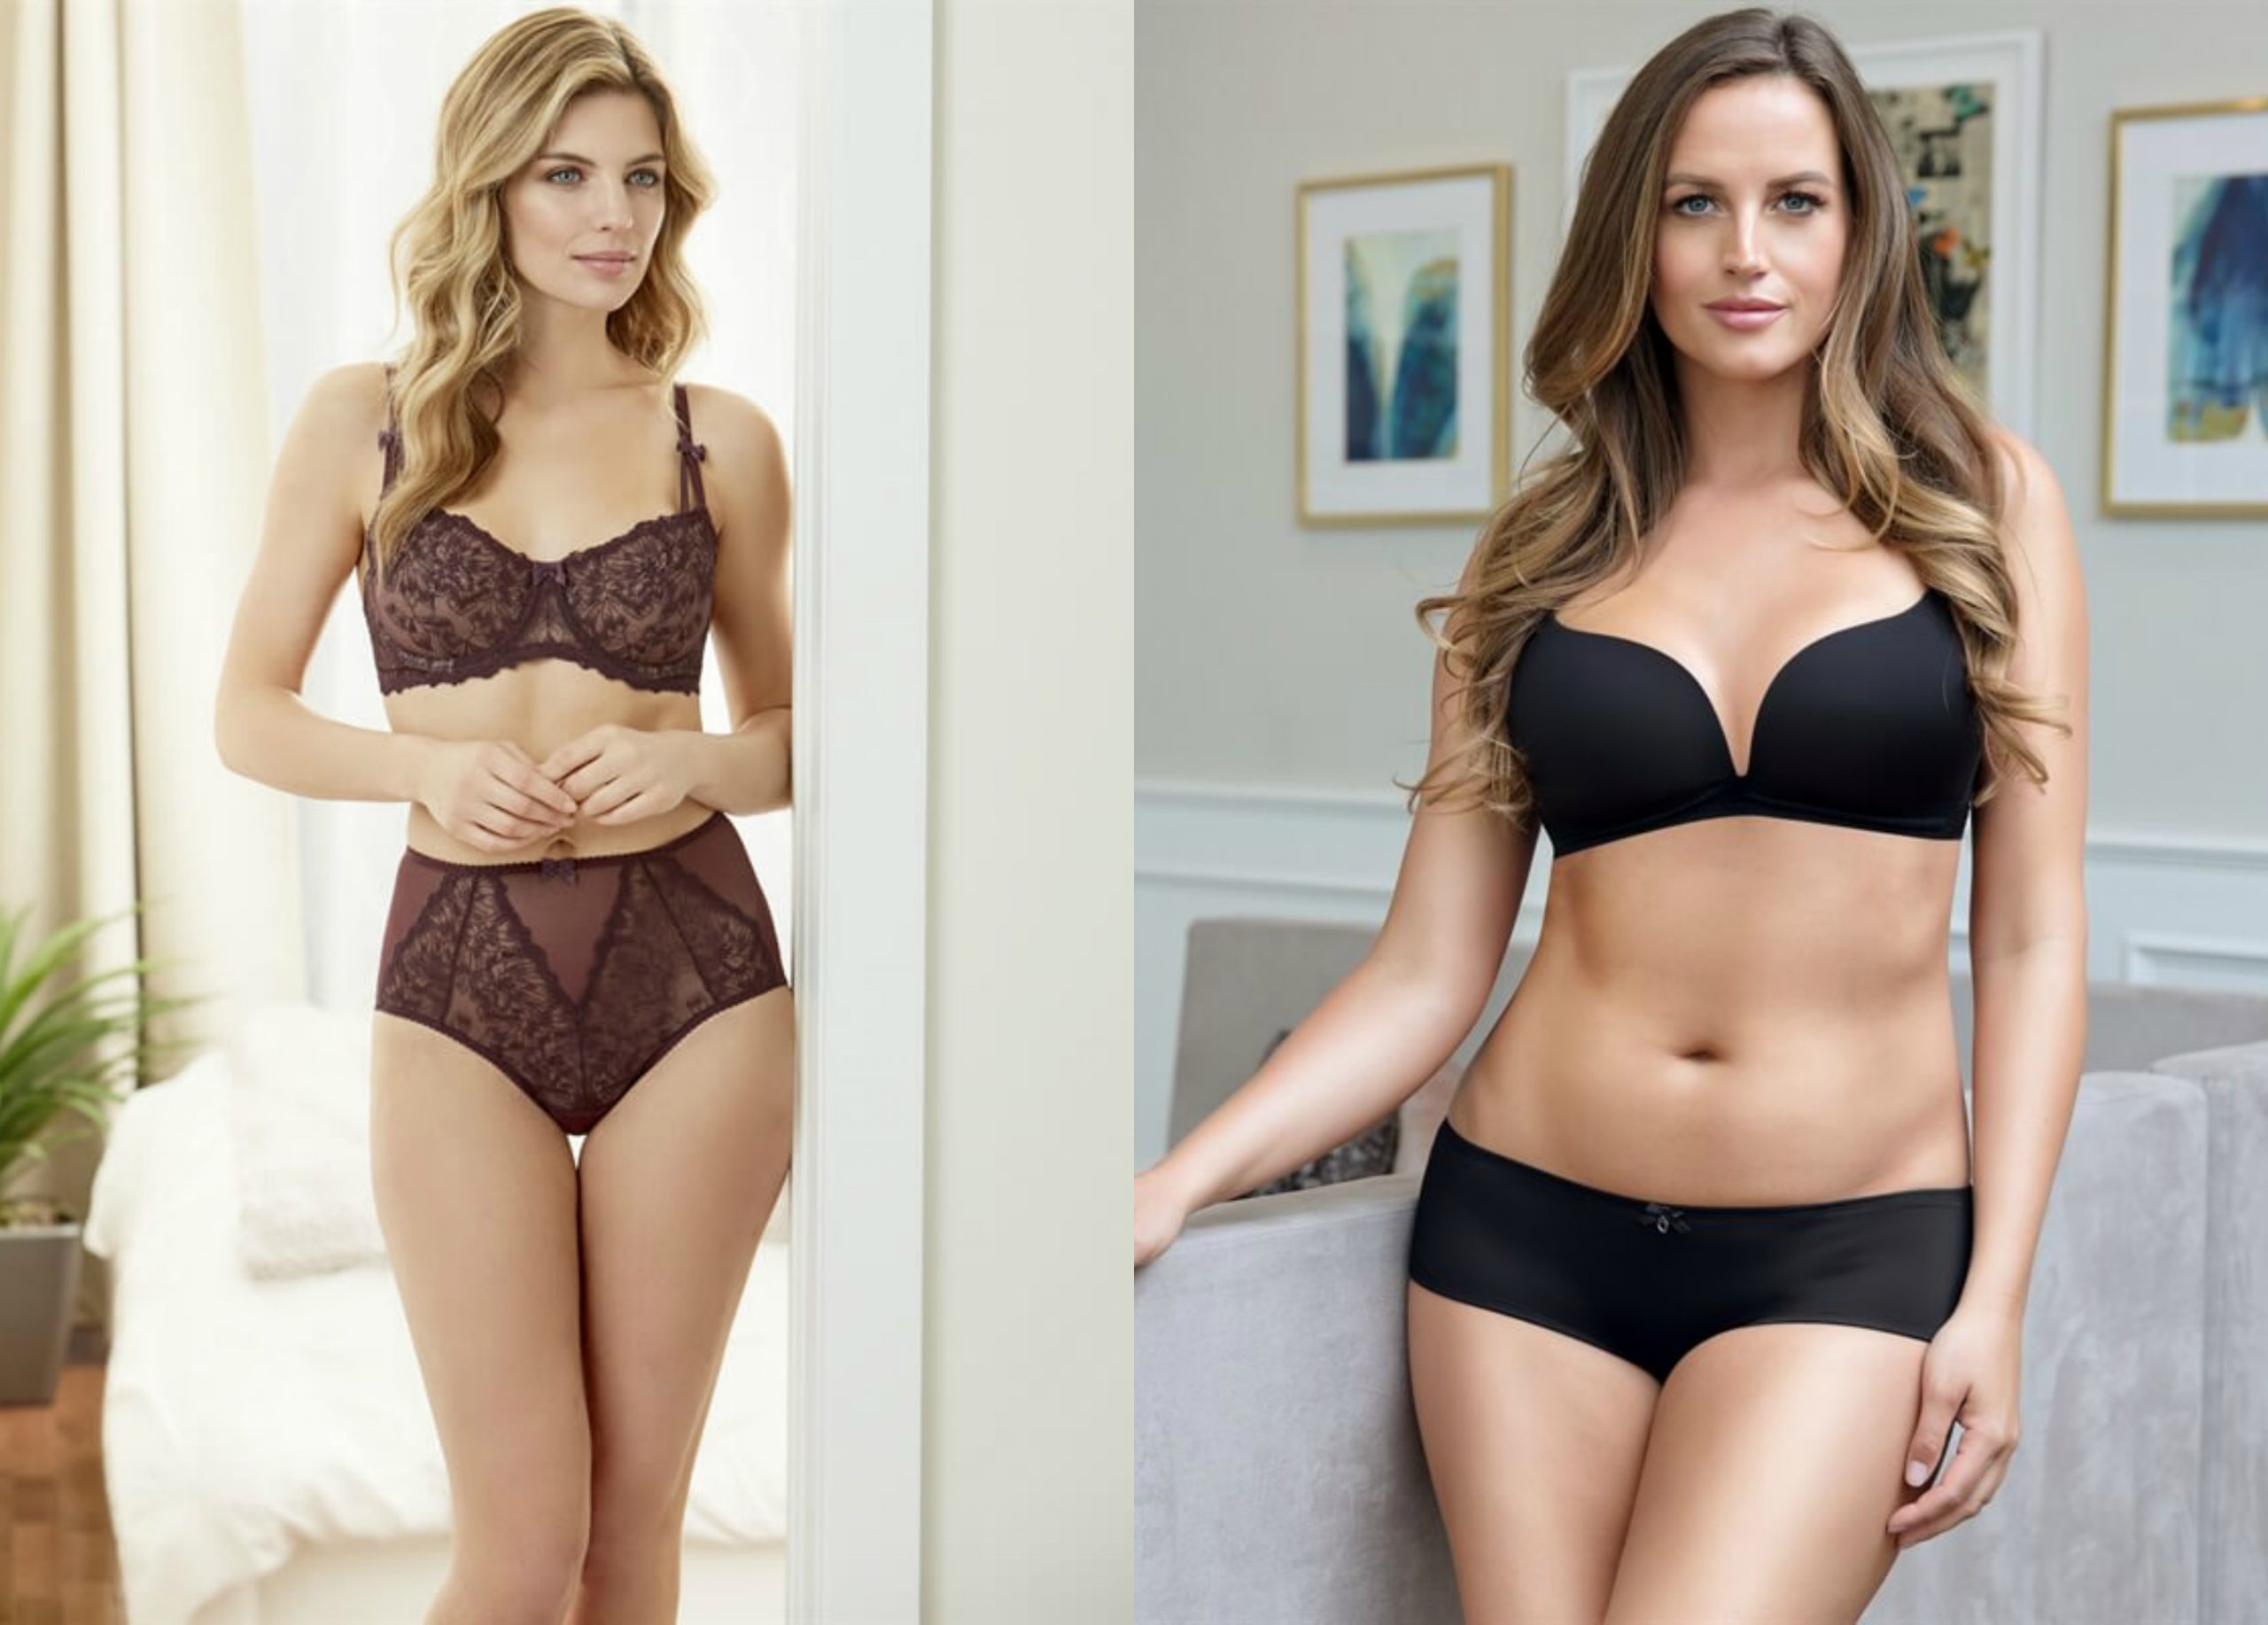 5 Tips To Have A Successful Bra Shop – Bra Doctor's Blog